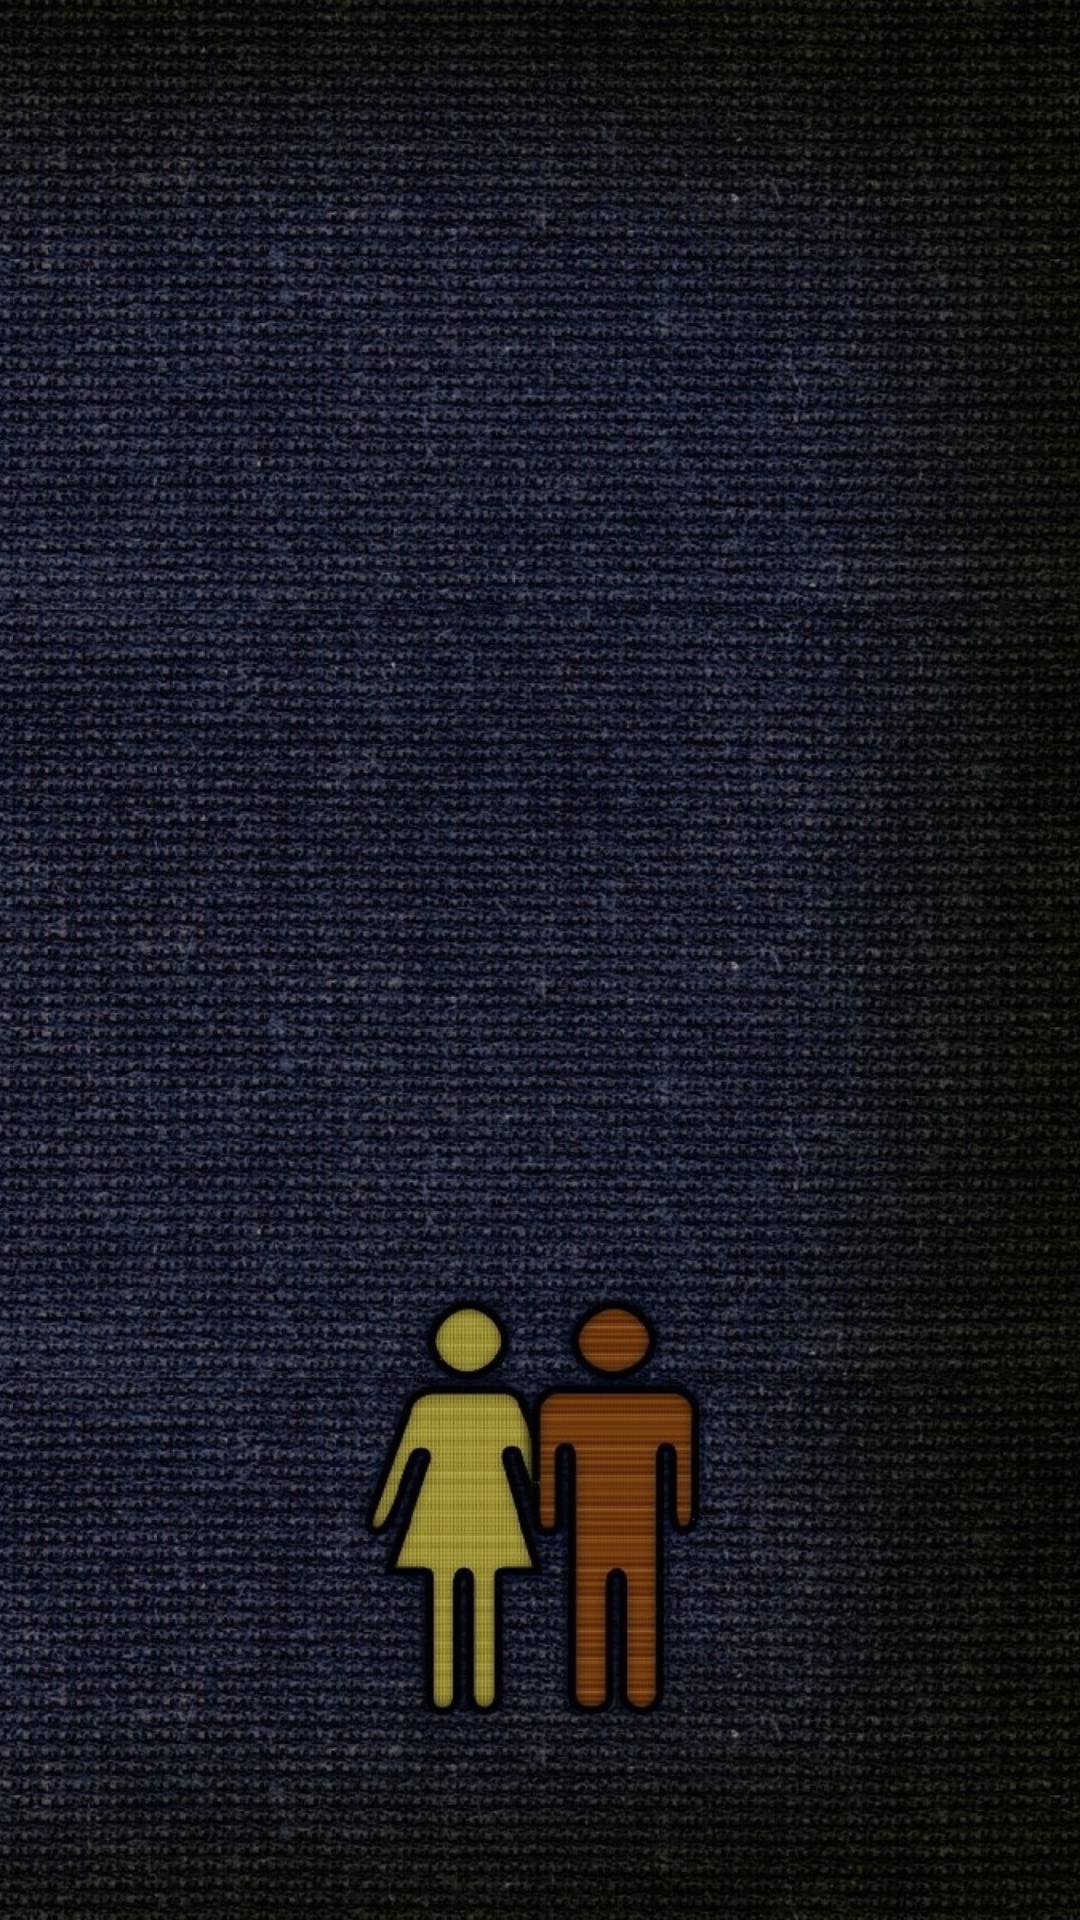 Das Him And Her Wallpaper 1080x1920